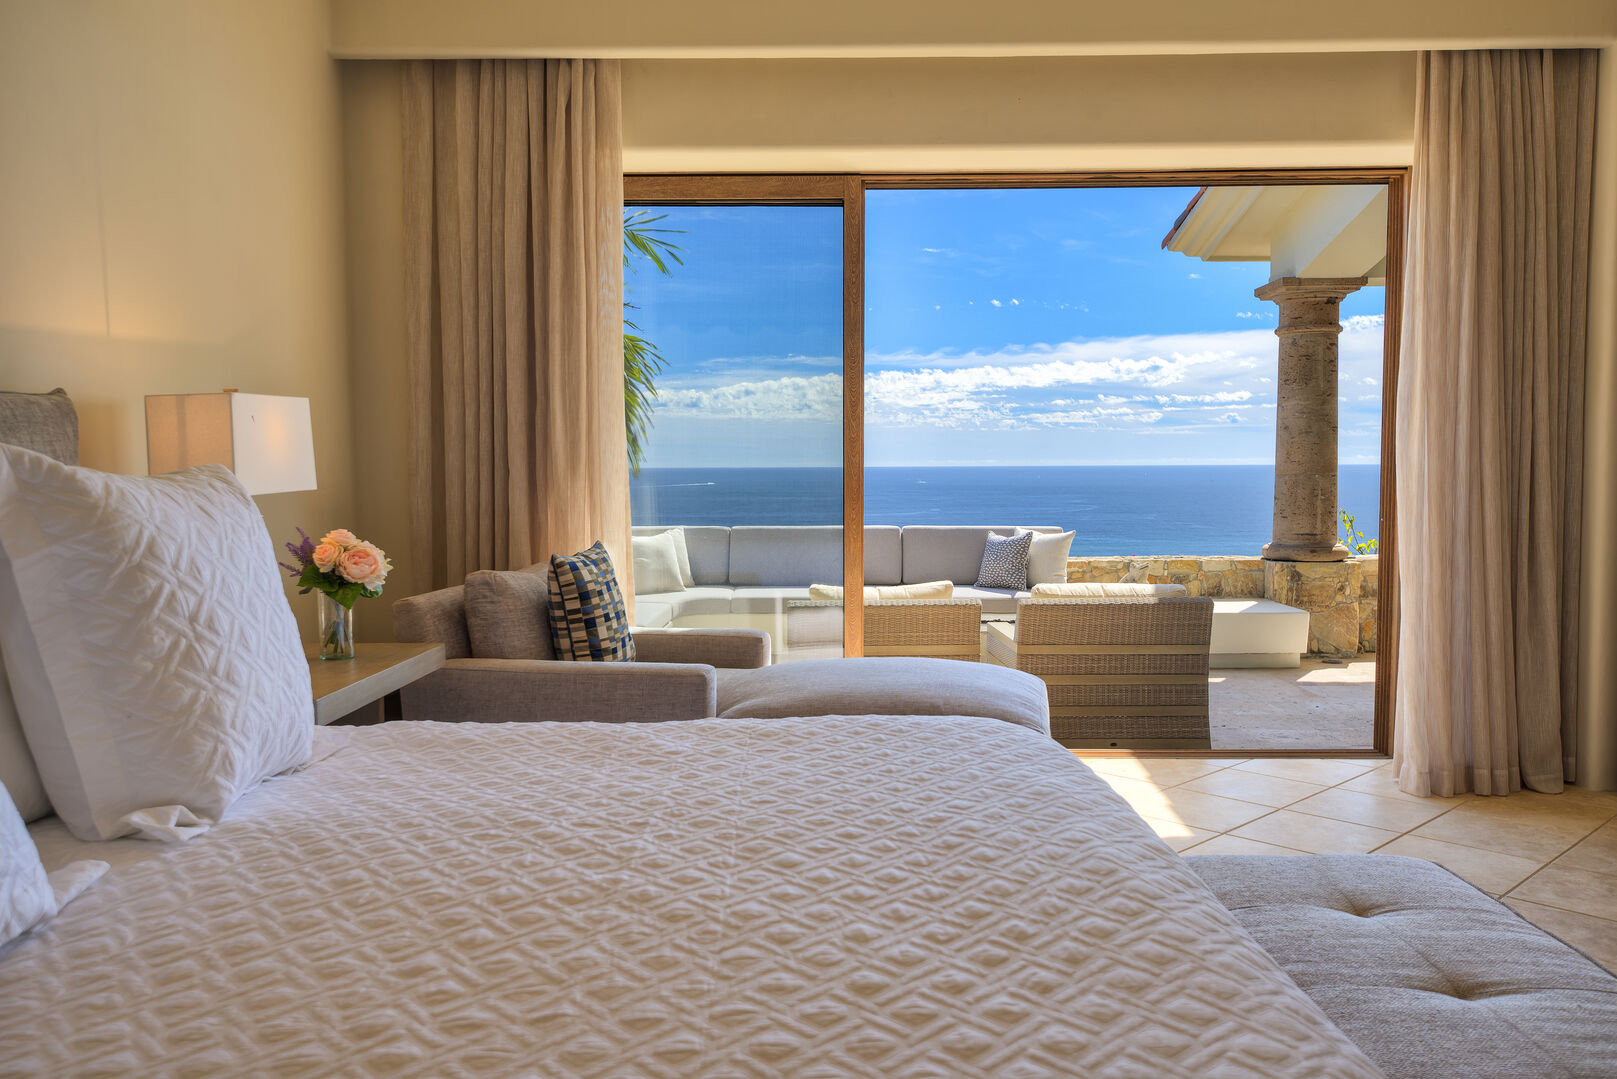 Bedroom with ocean views and one bed